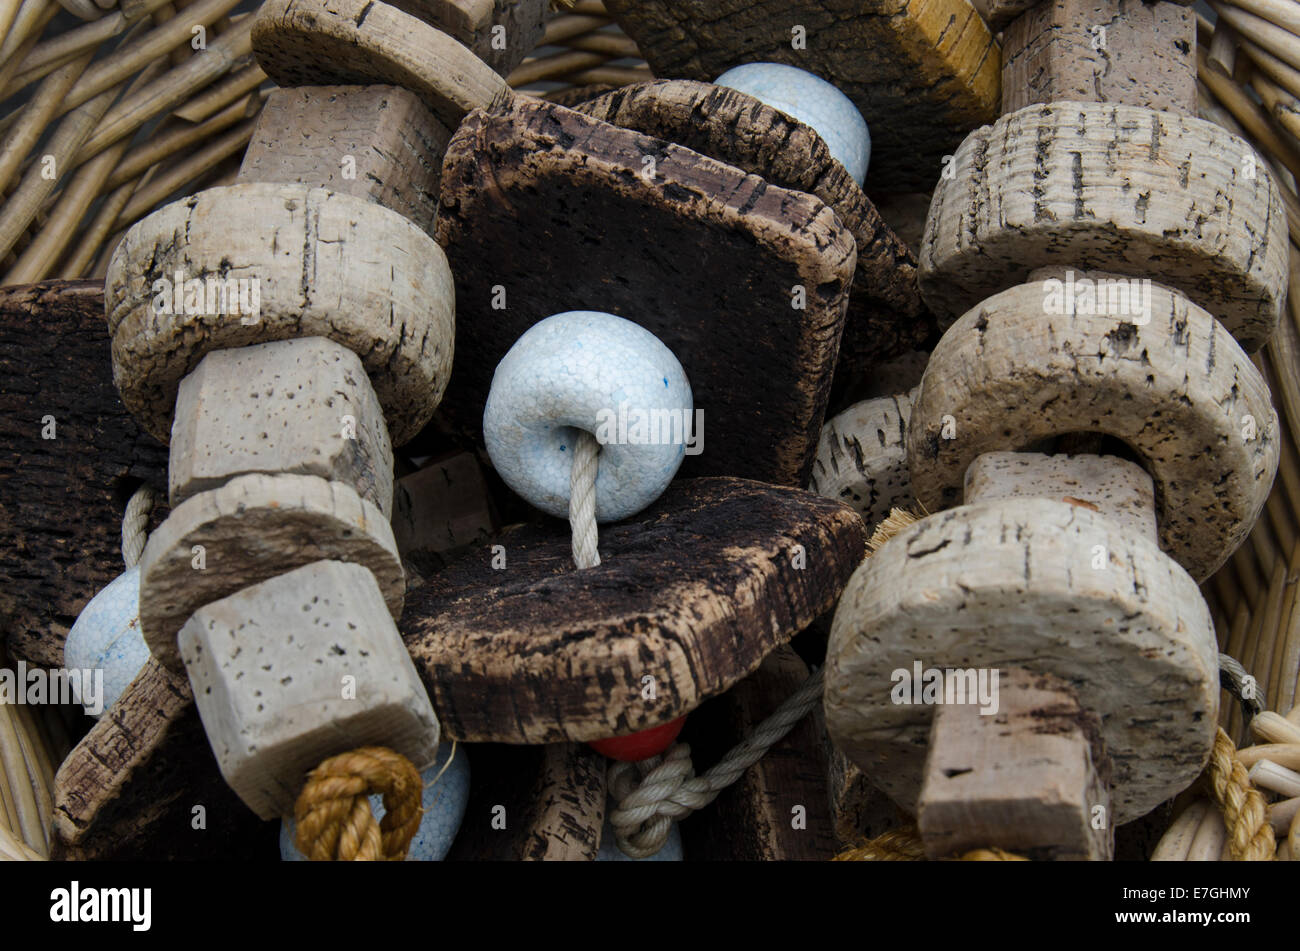 Close-up of fishing corks in a basket Stock Photo